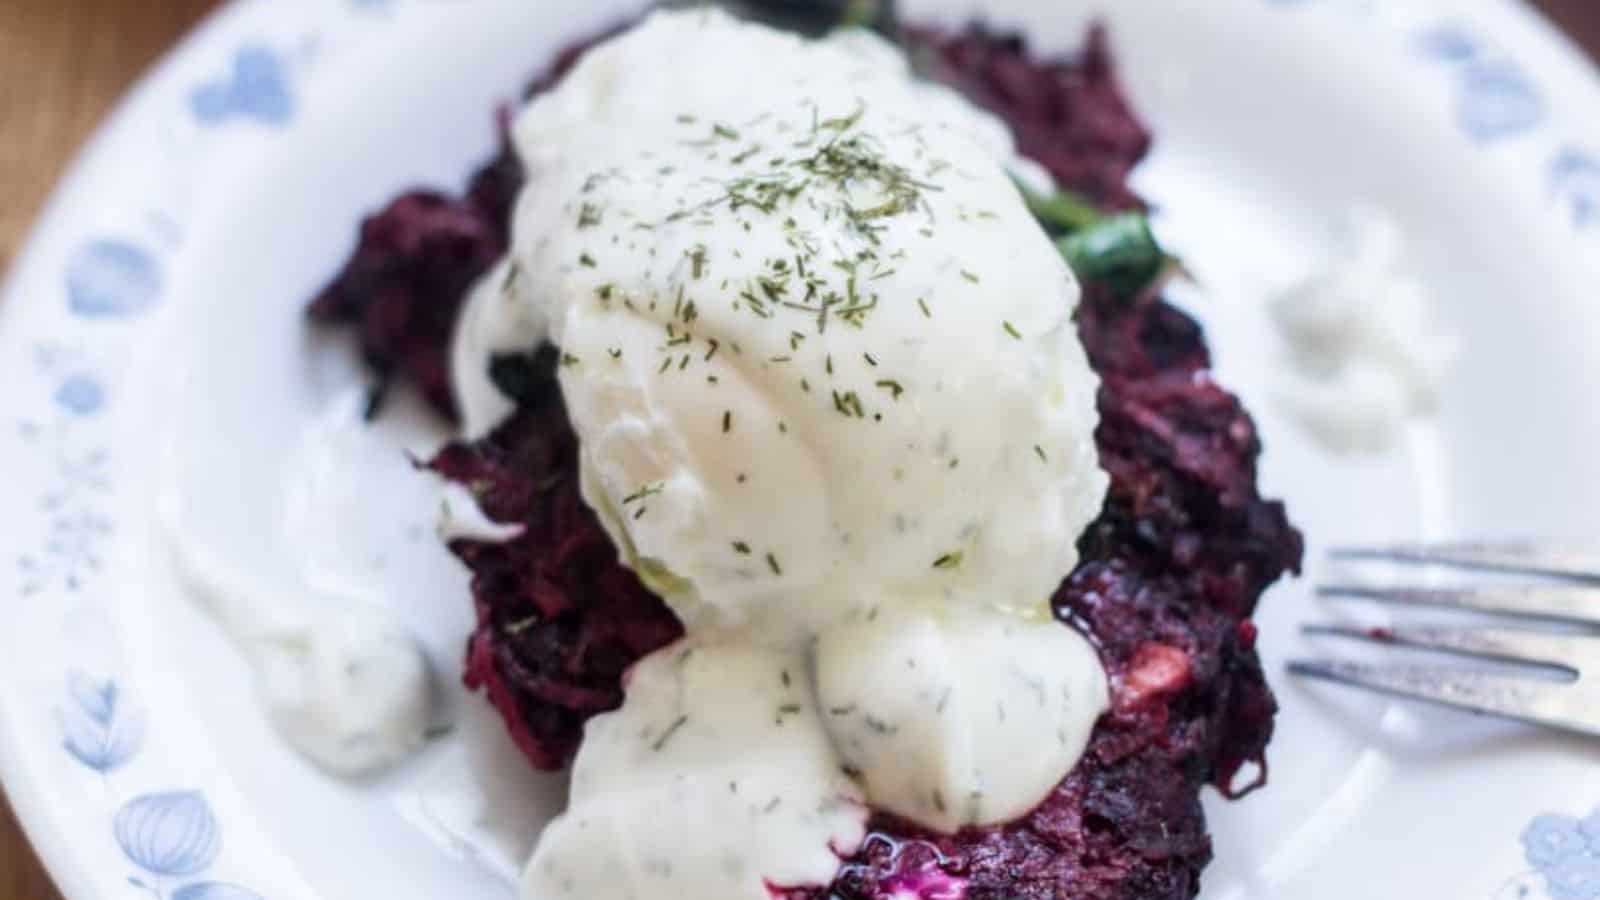 Beetroot pancakes with sour cream on a plate.